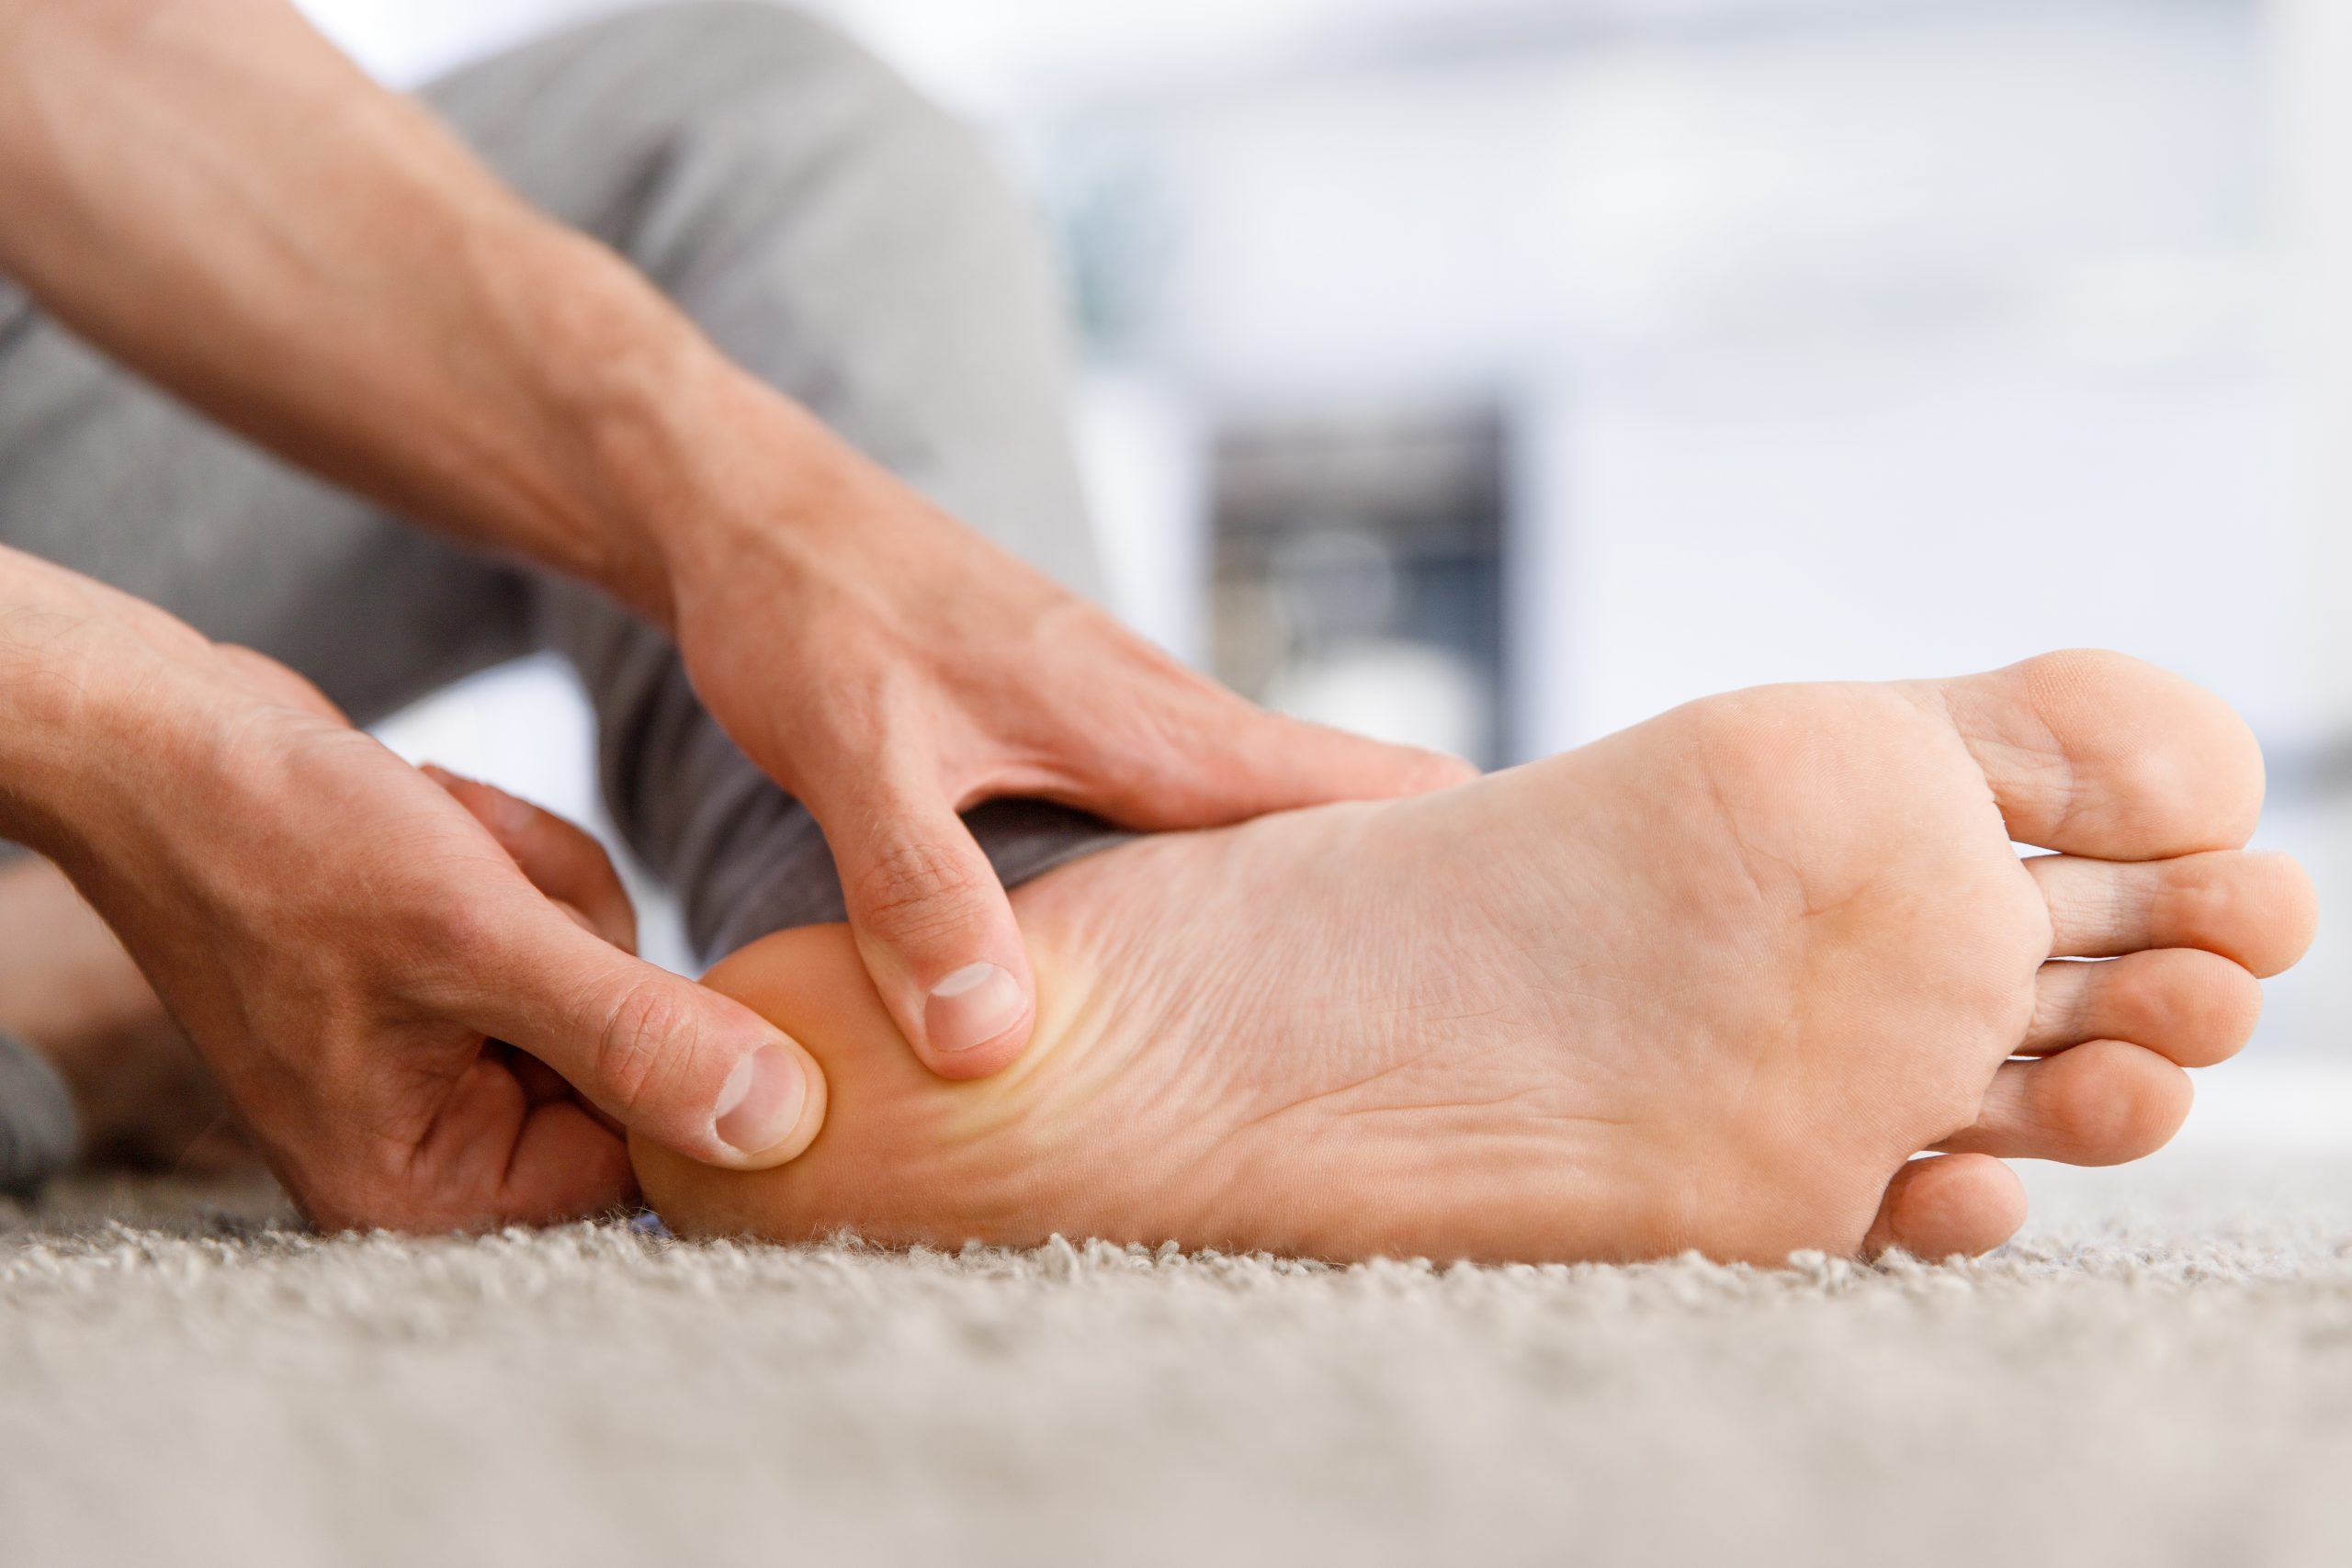 Man hands giving foot massage to yourself after a long walk, suffering from pain in heel spur and plantar fasciitis